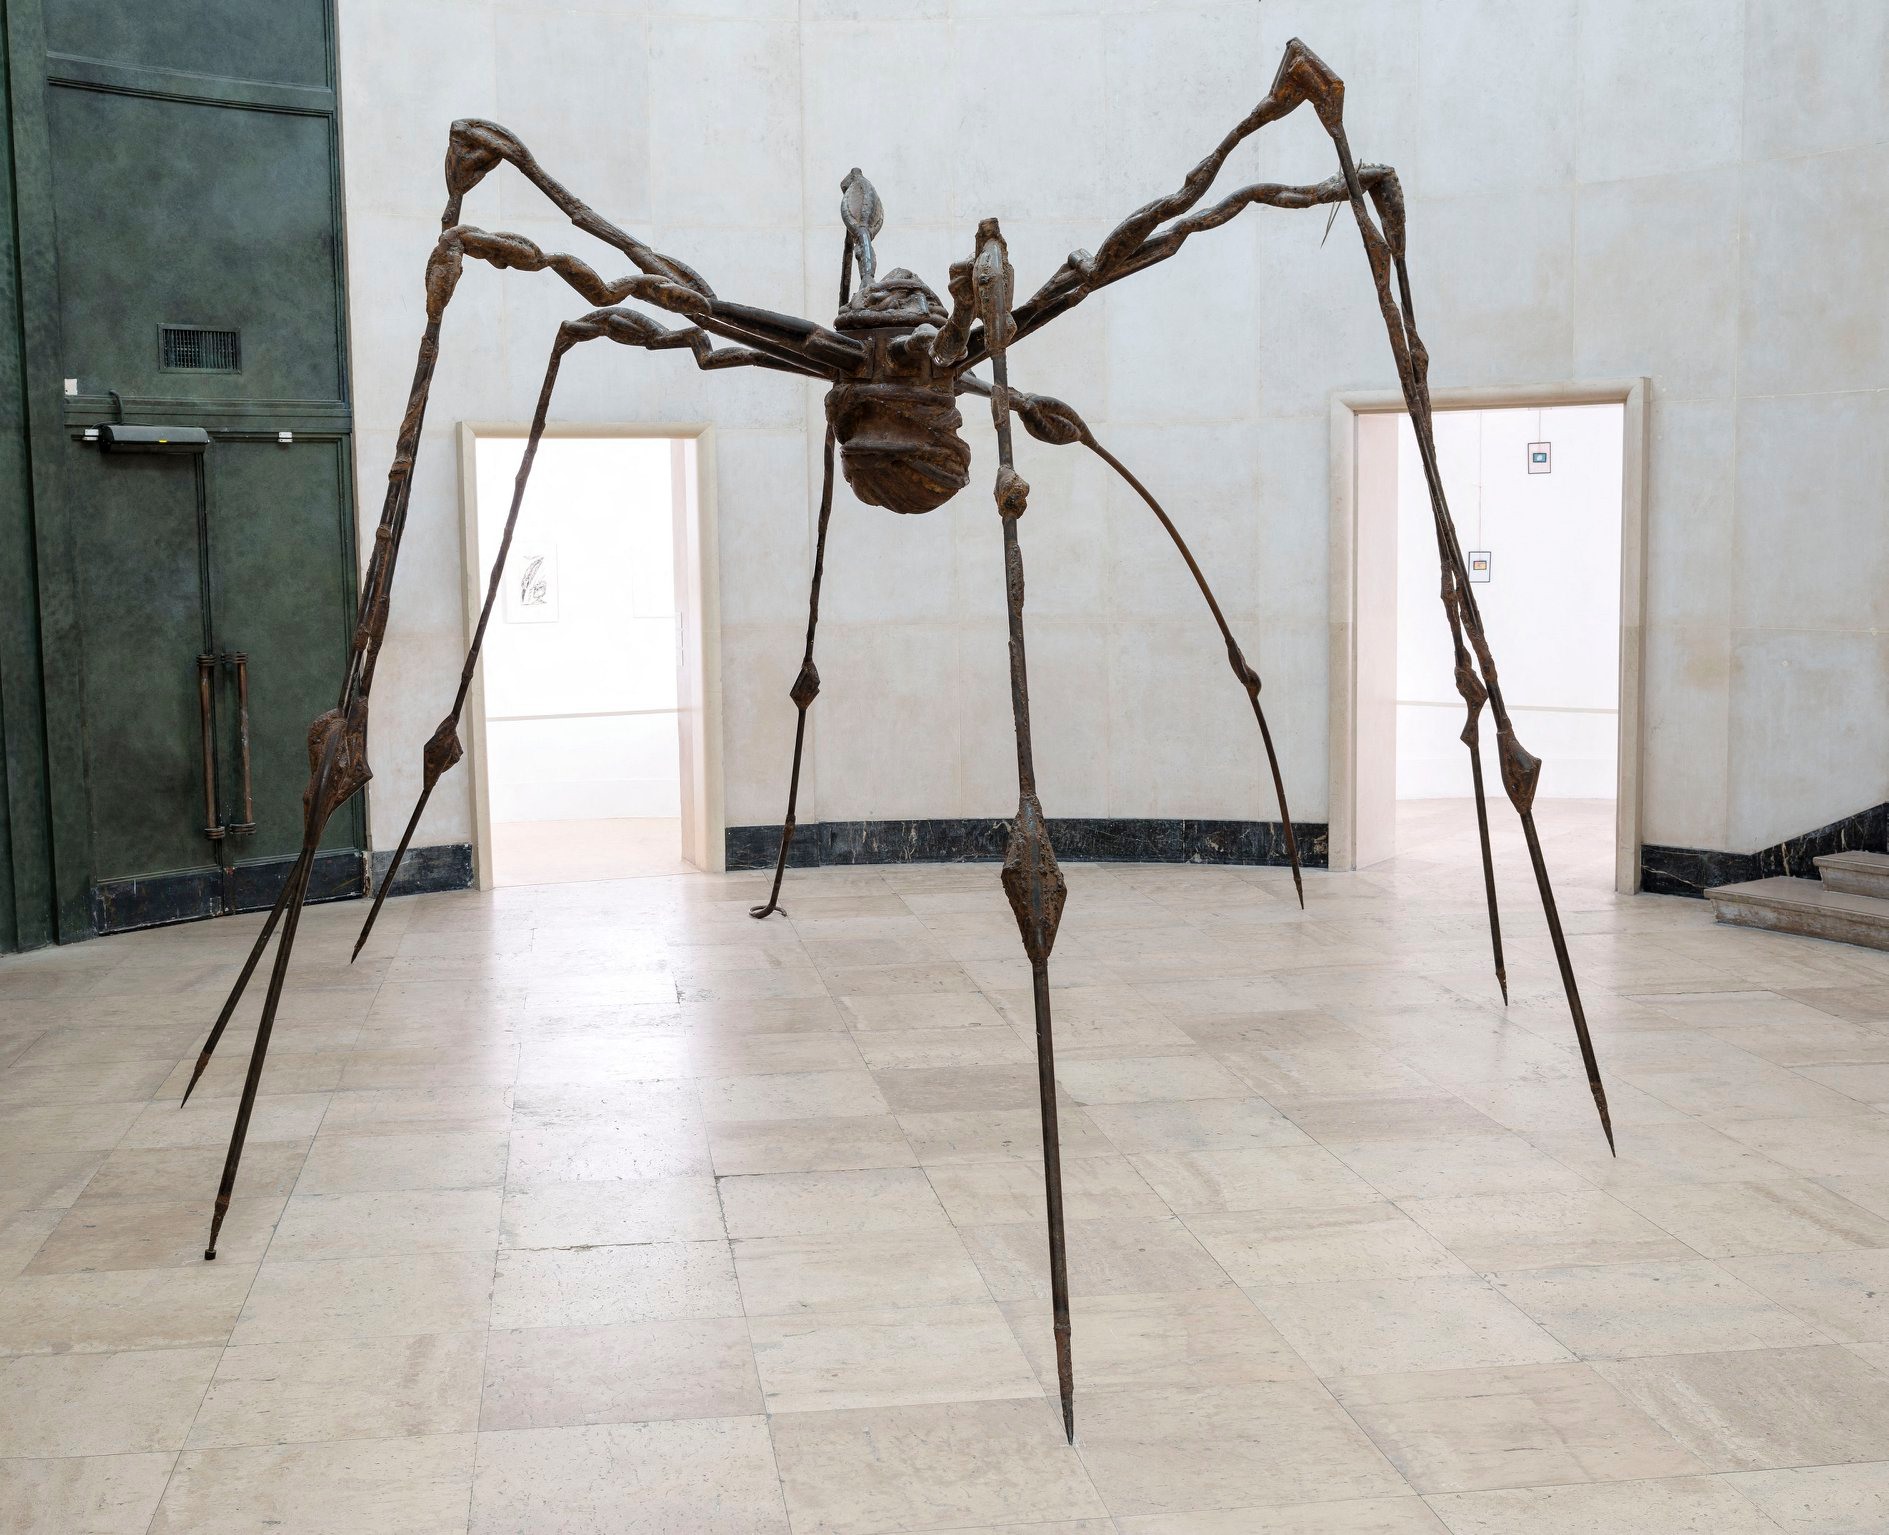 Louise Bourgeois, Spider 